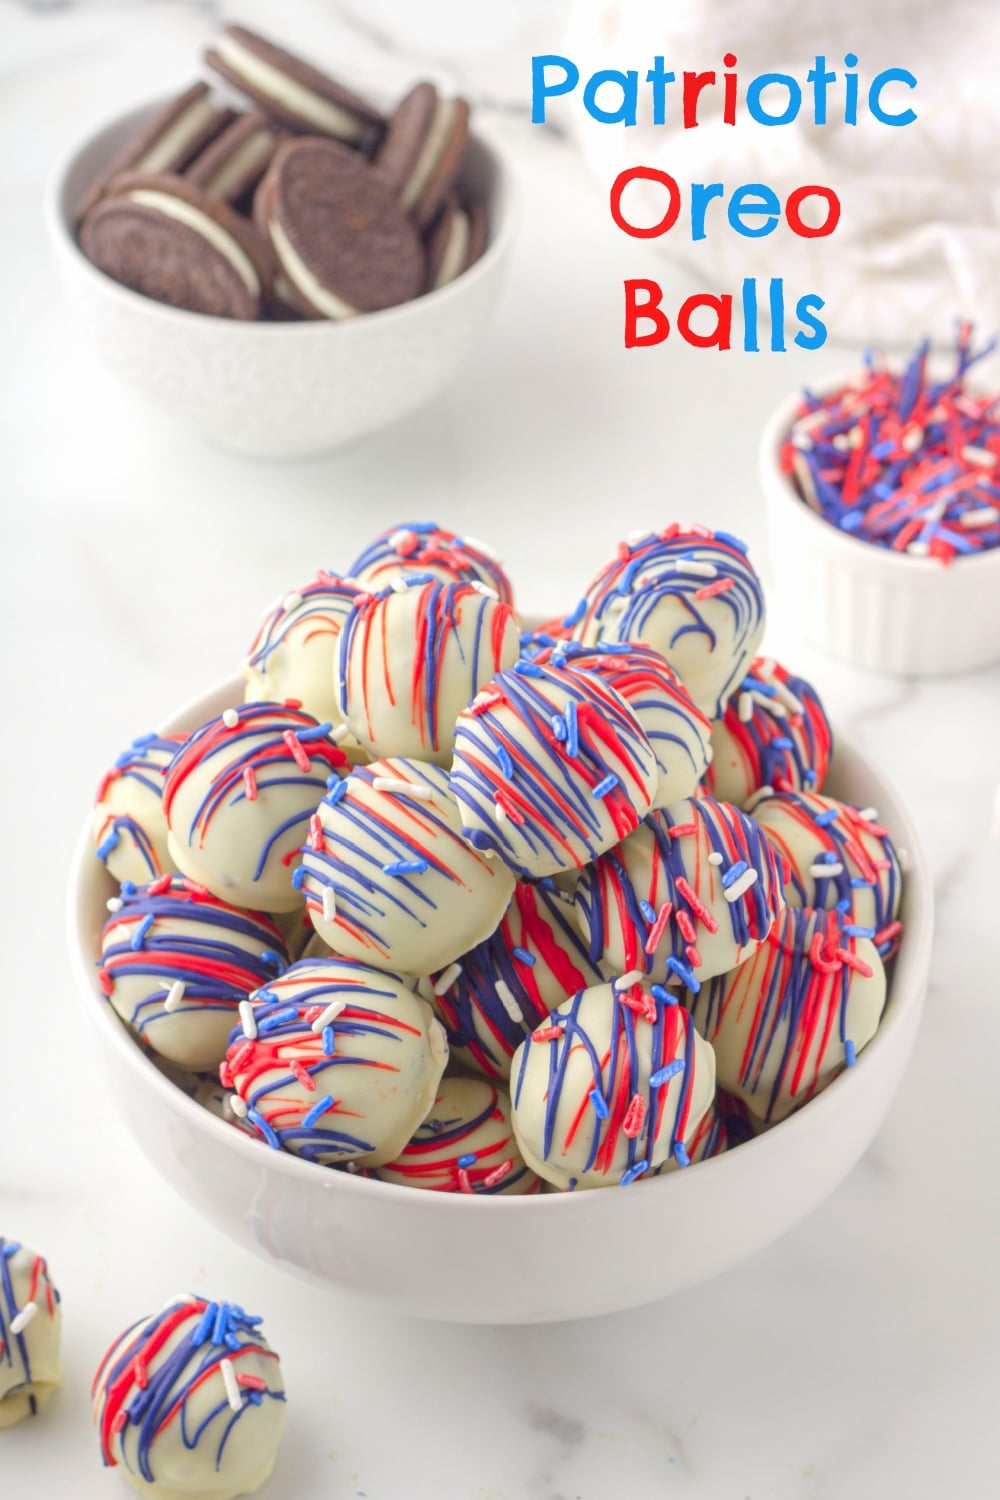 Patriotic Oreo Balls - they're a fine line between cookie and candy, but festive all the same. via @cmpollak1